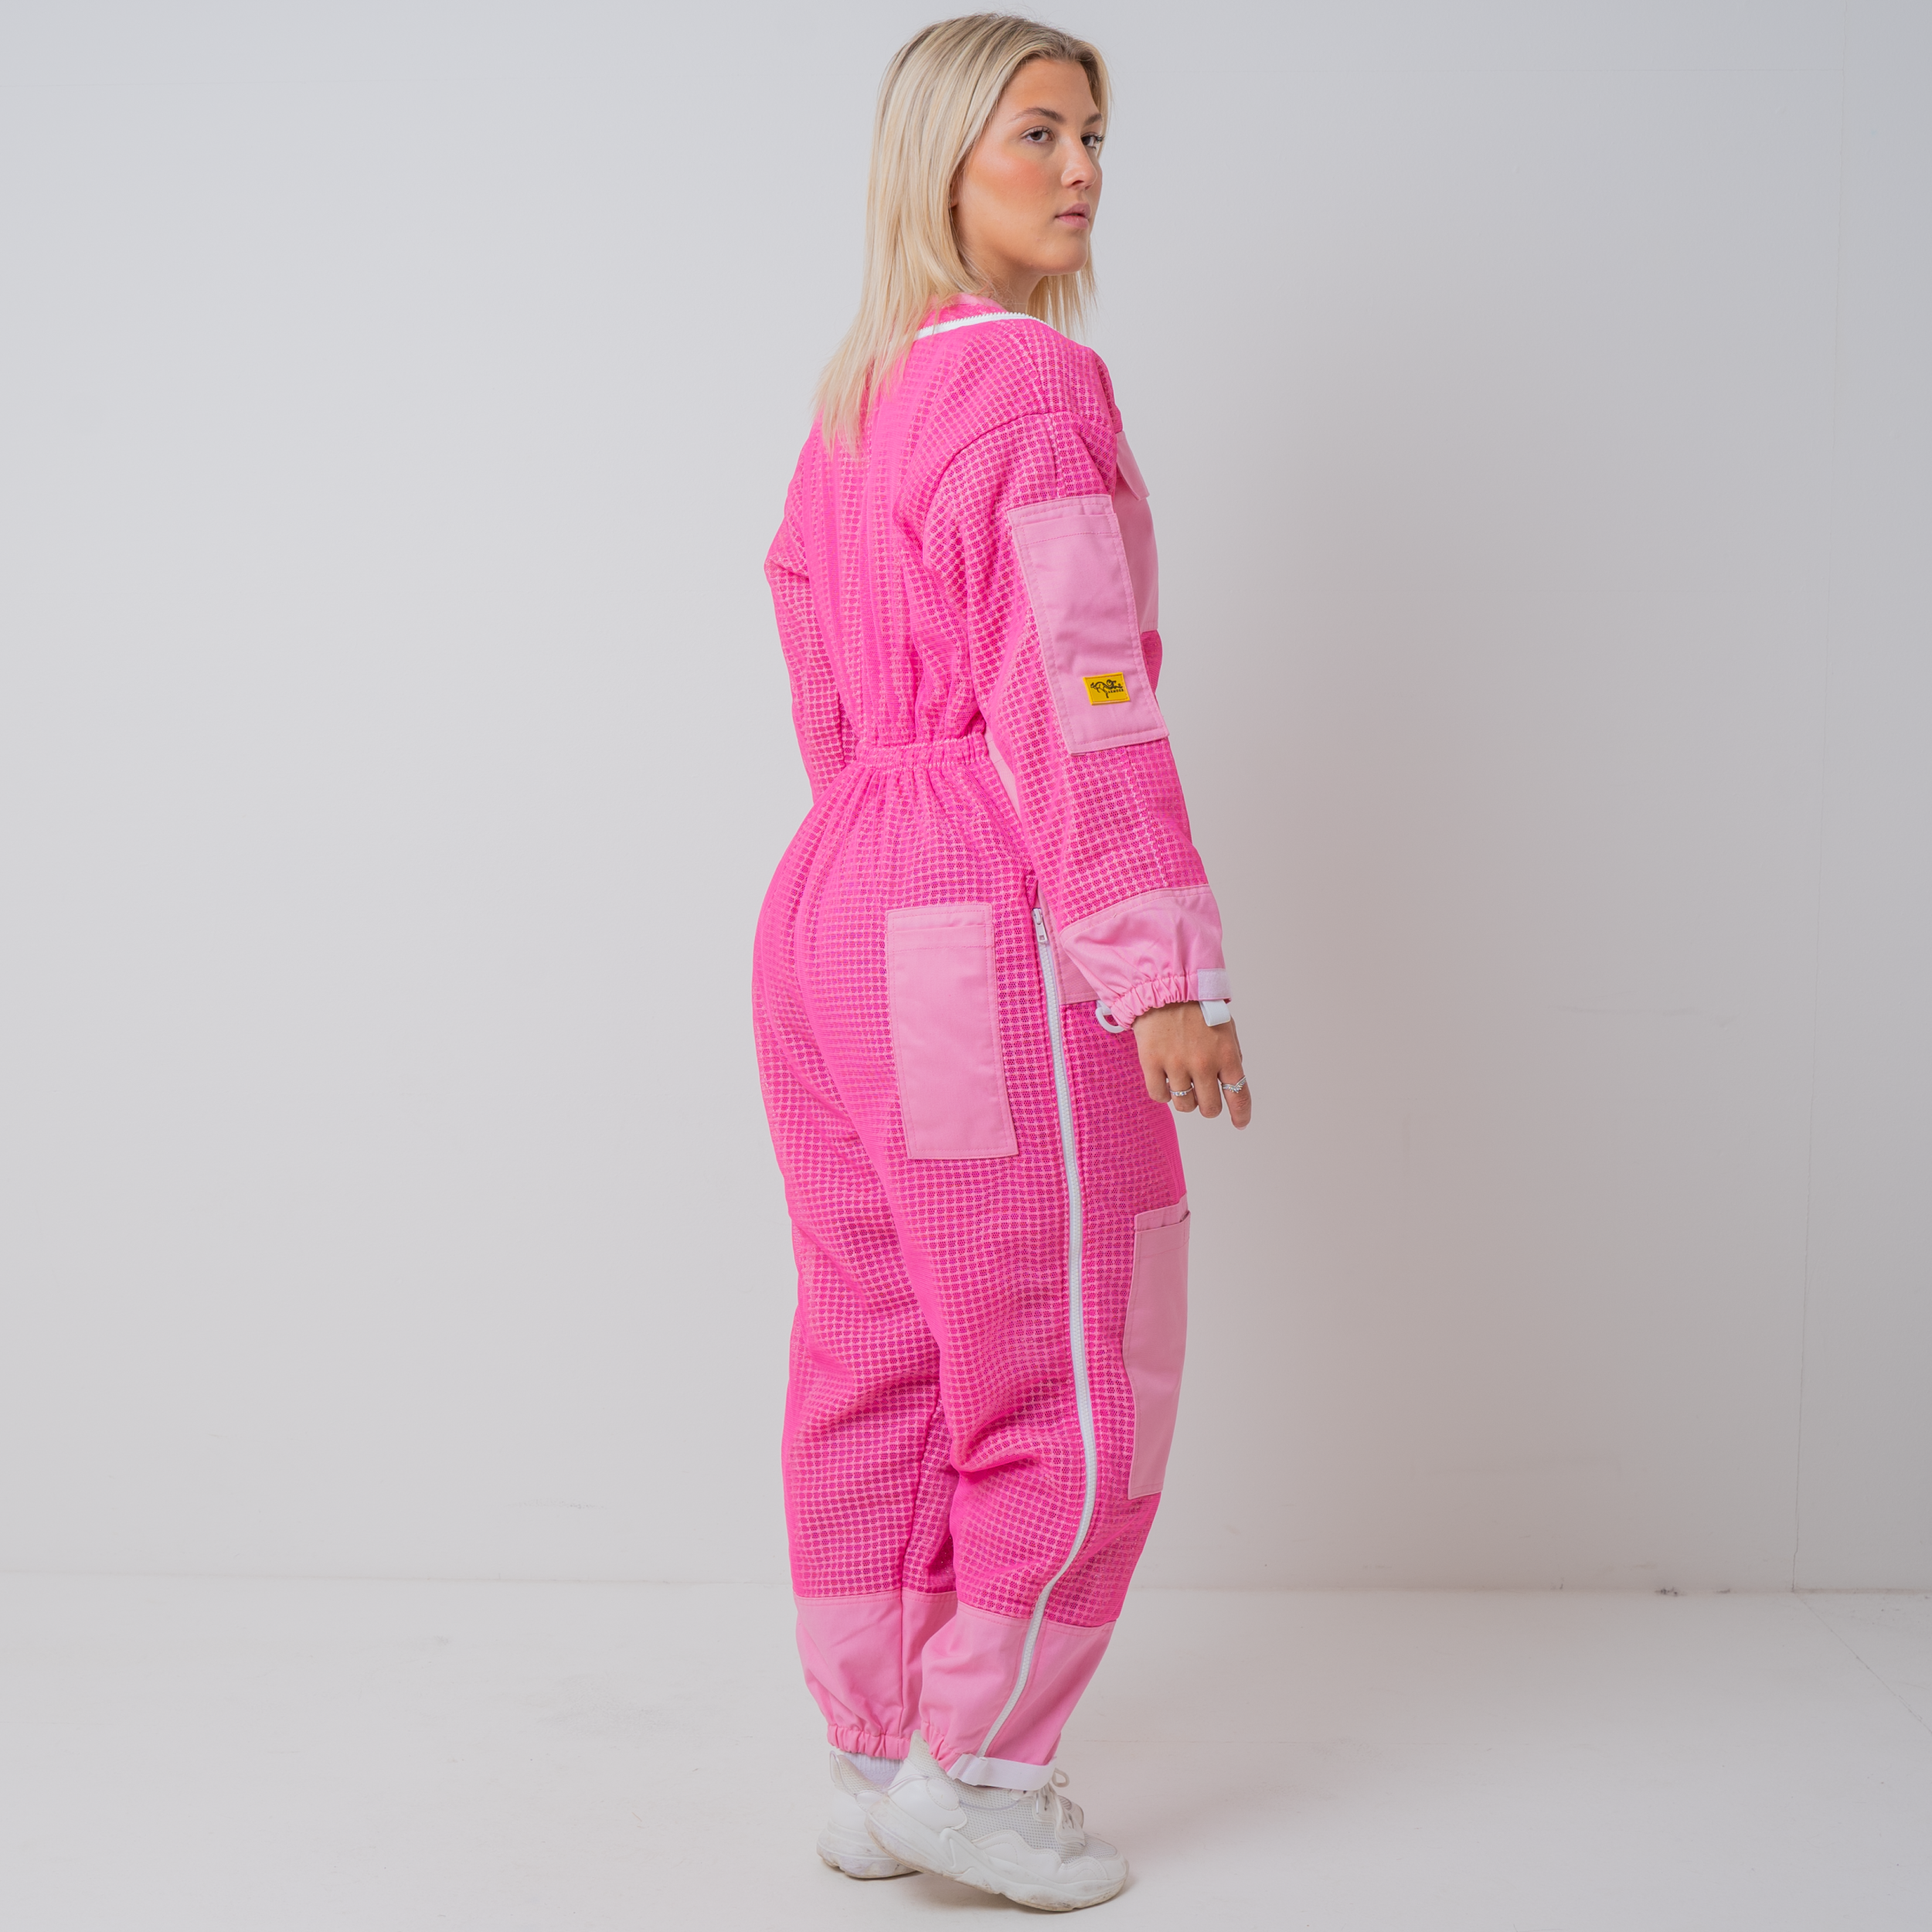 PINK Beekeeping Suit - Women Right Back Side